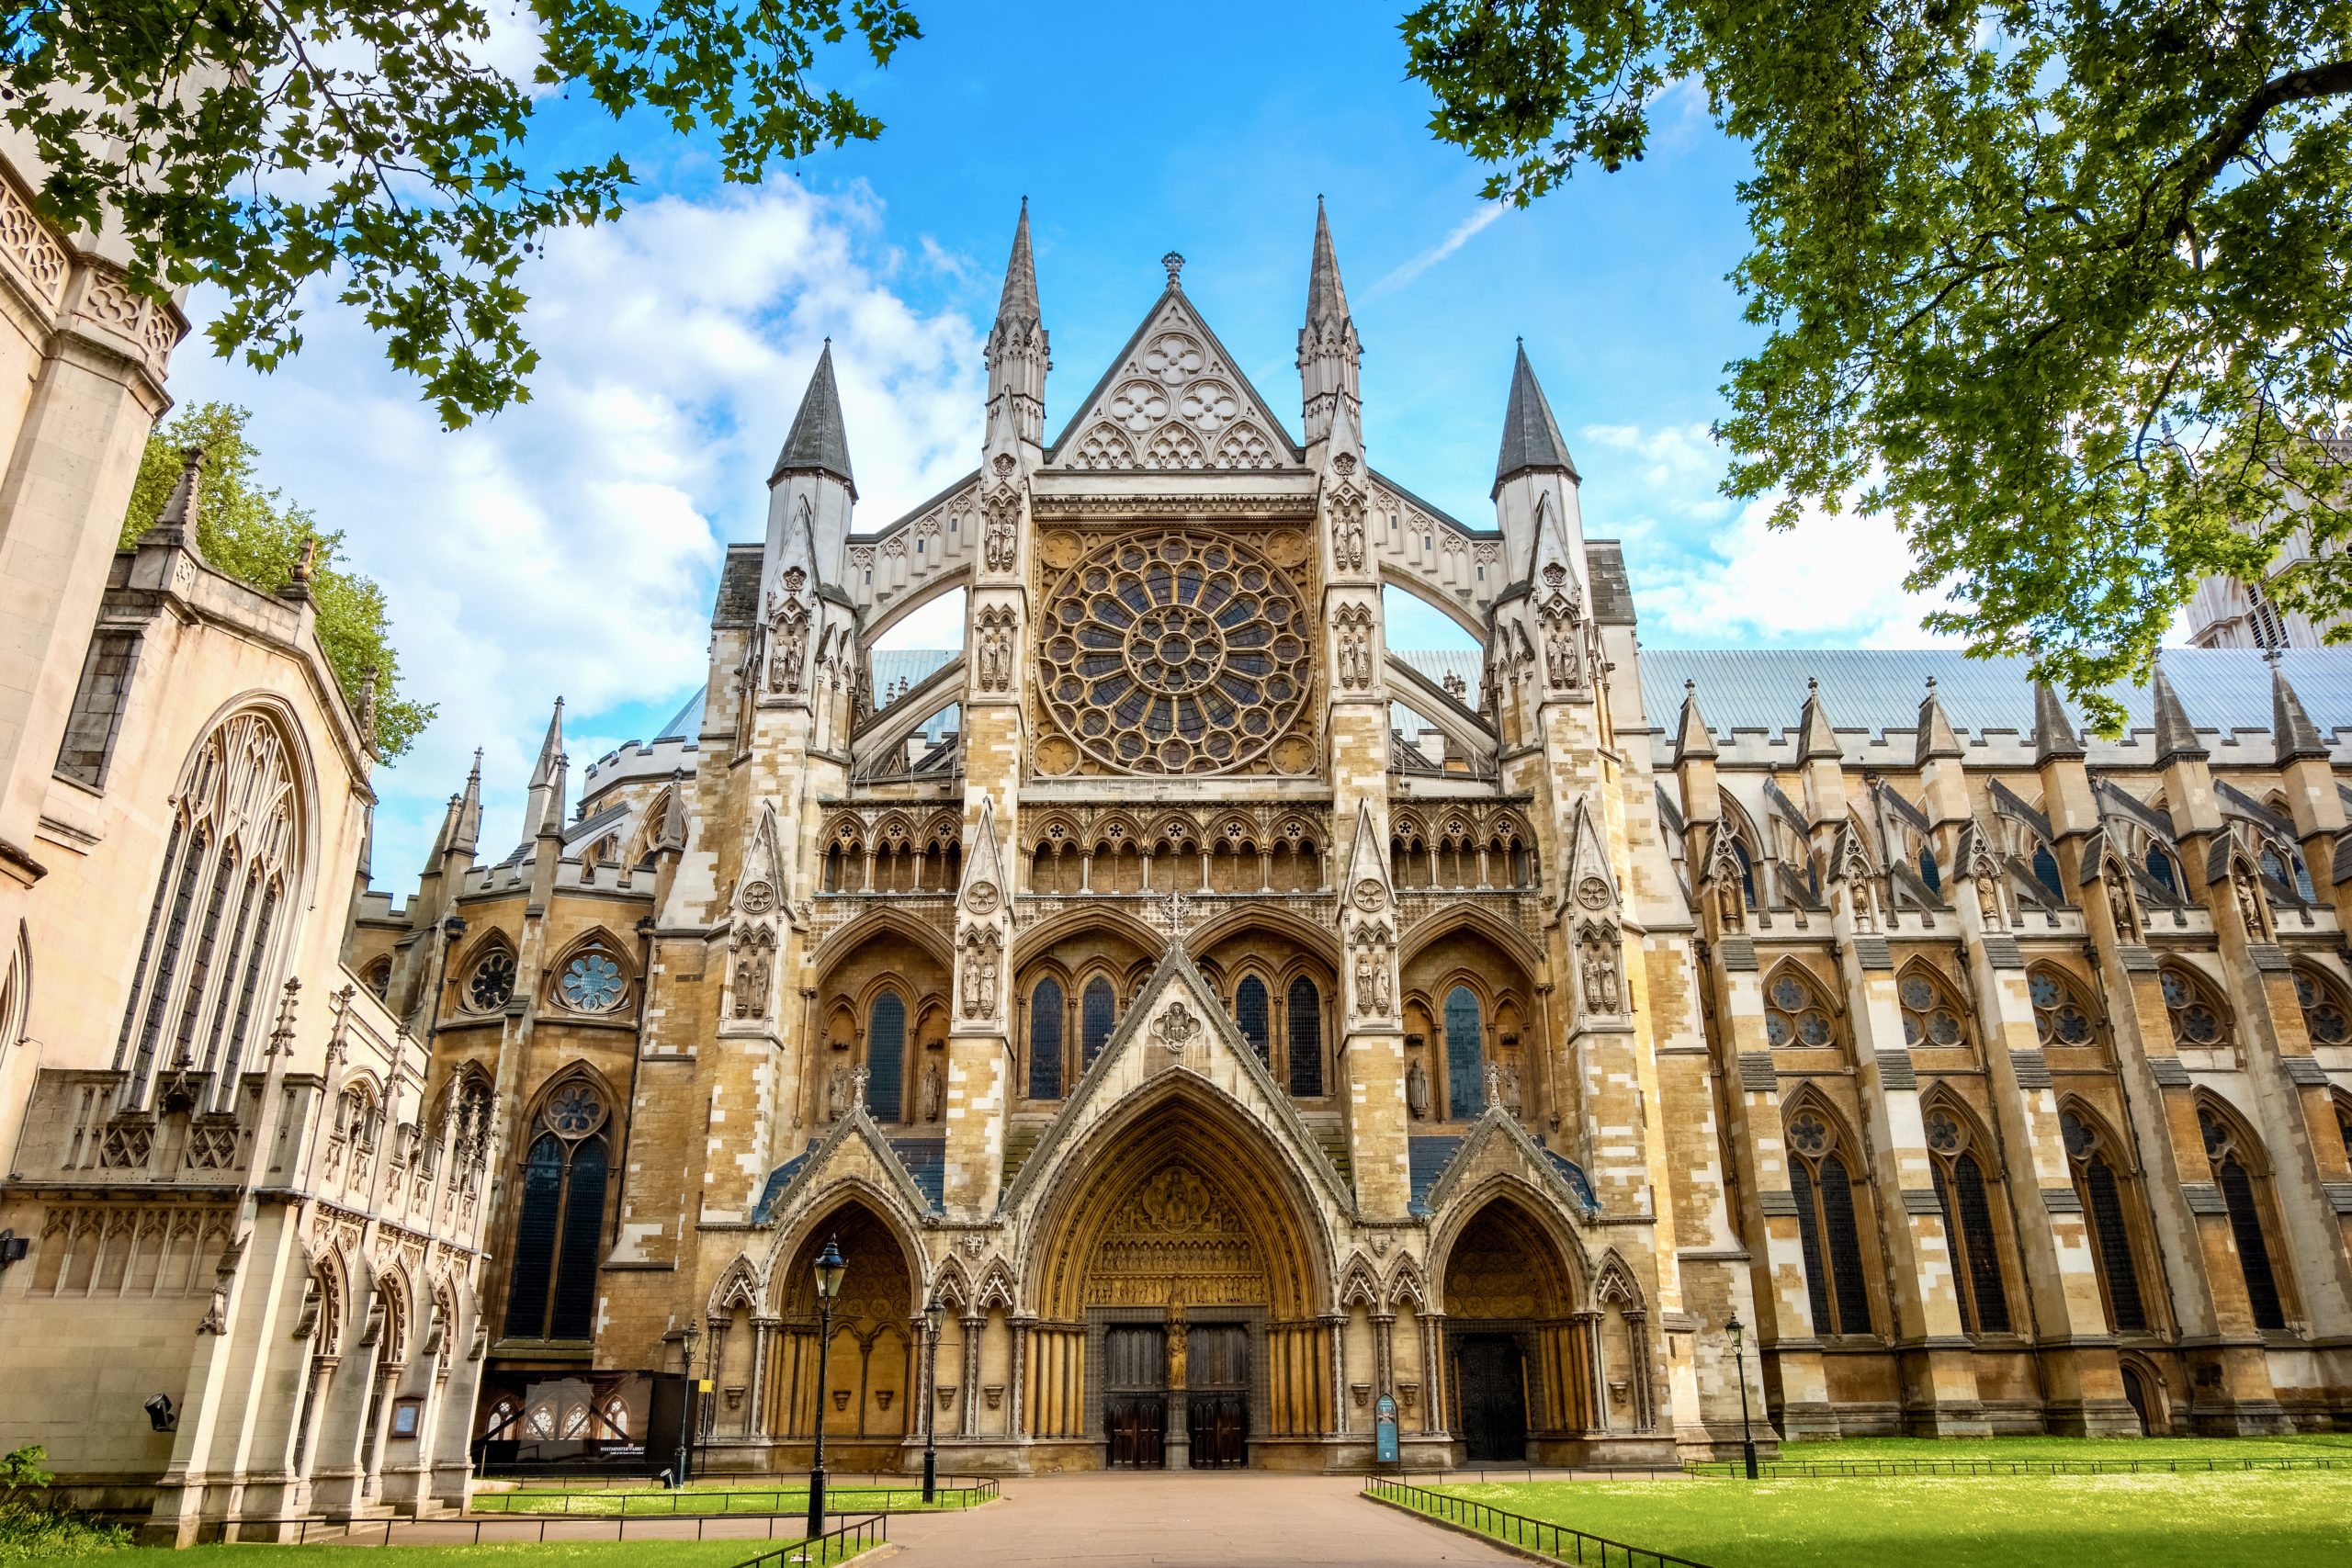 London, UK - May 13 2018: Westminster Abbey is one of the United Kingdom's most notable religious buildings and the traditional place of coronation and burial site for English and, later, British monarchs